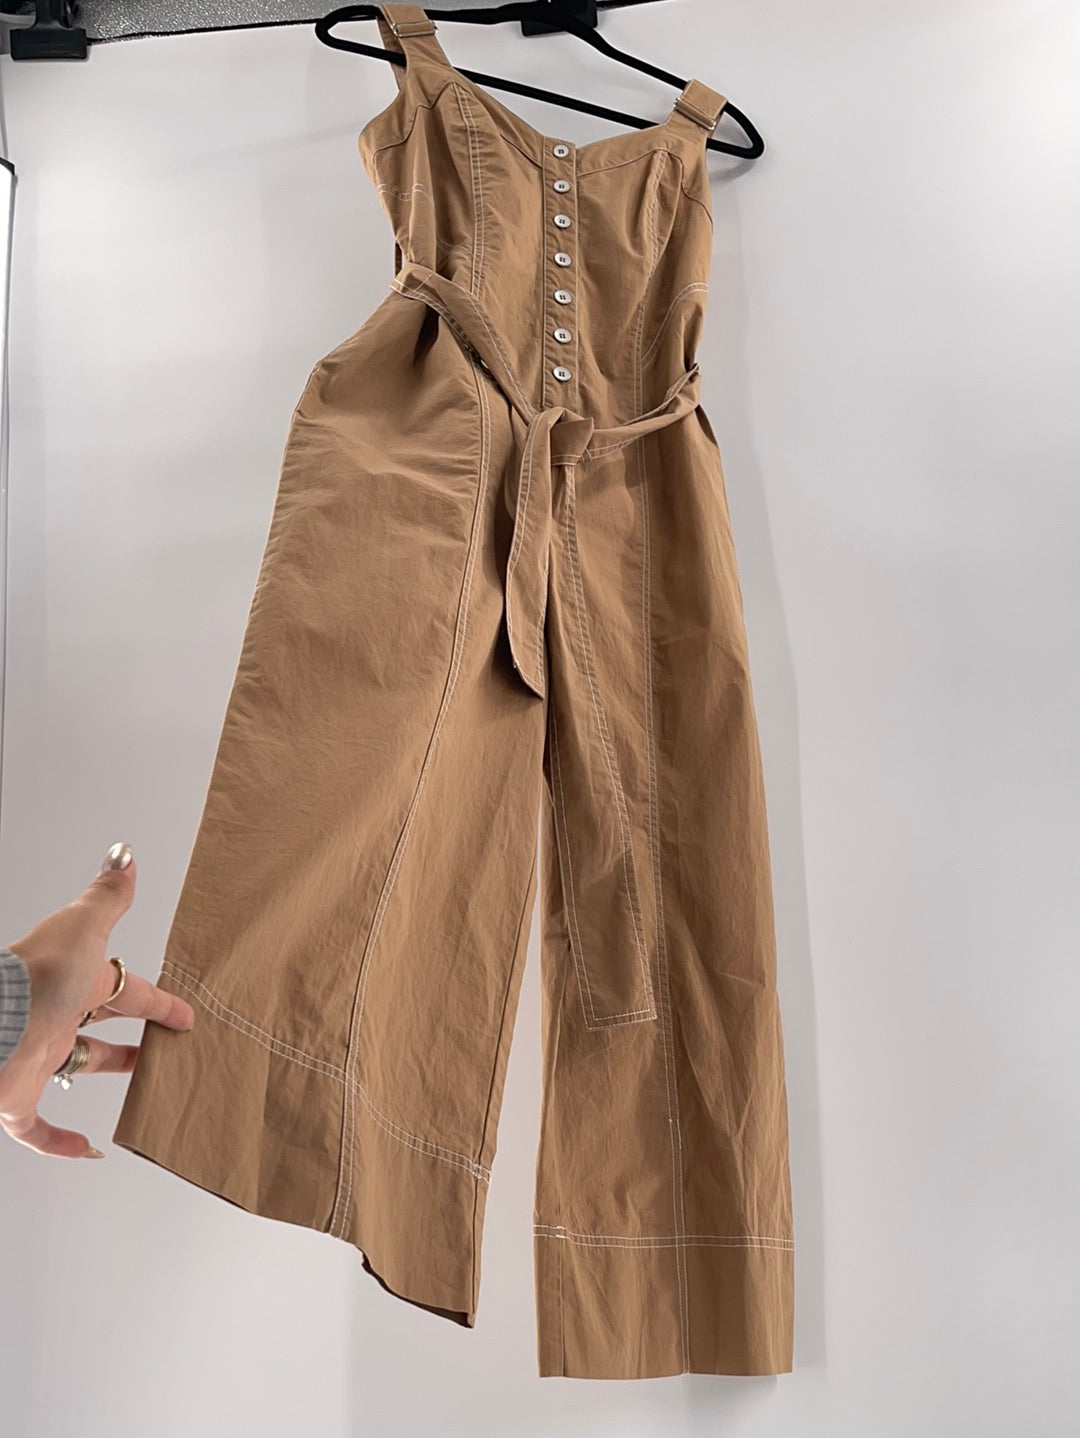 Current Air Anthropologie - Button Up Brown Adjustable Straps Jumpsuit (Size Small)